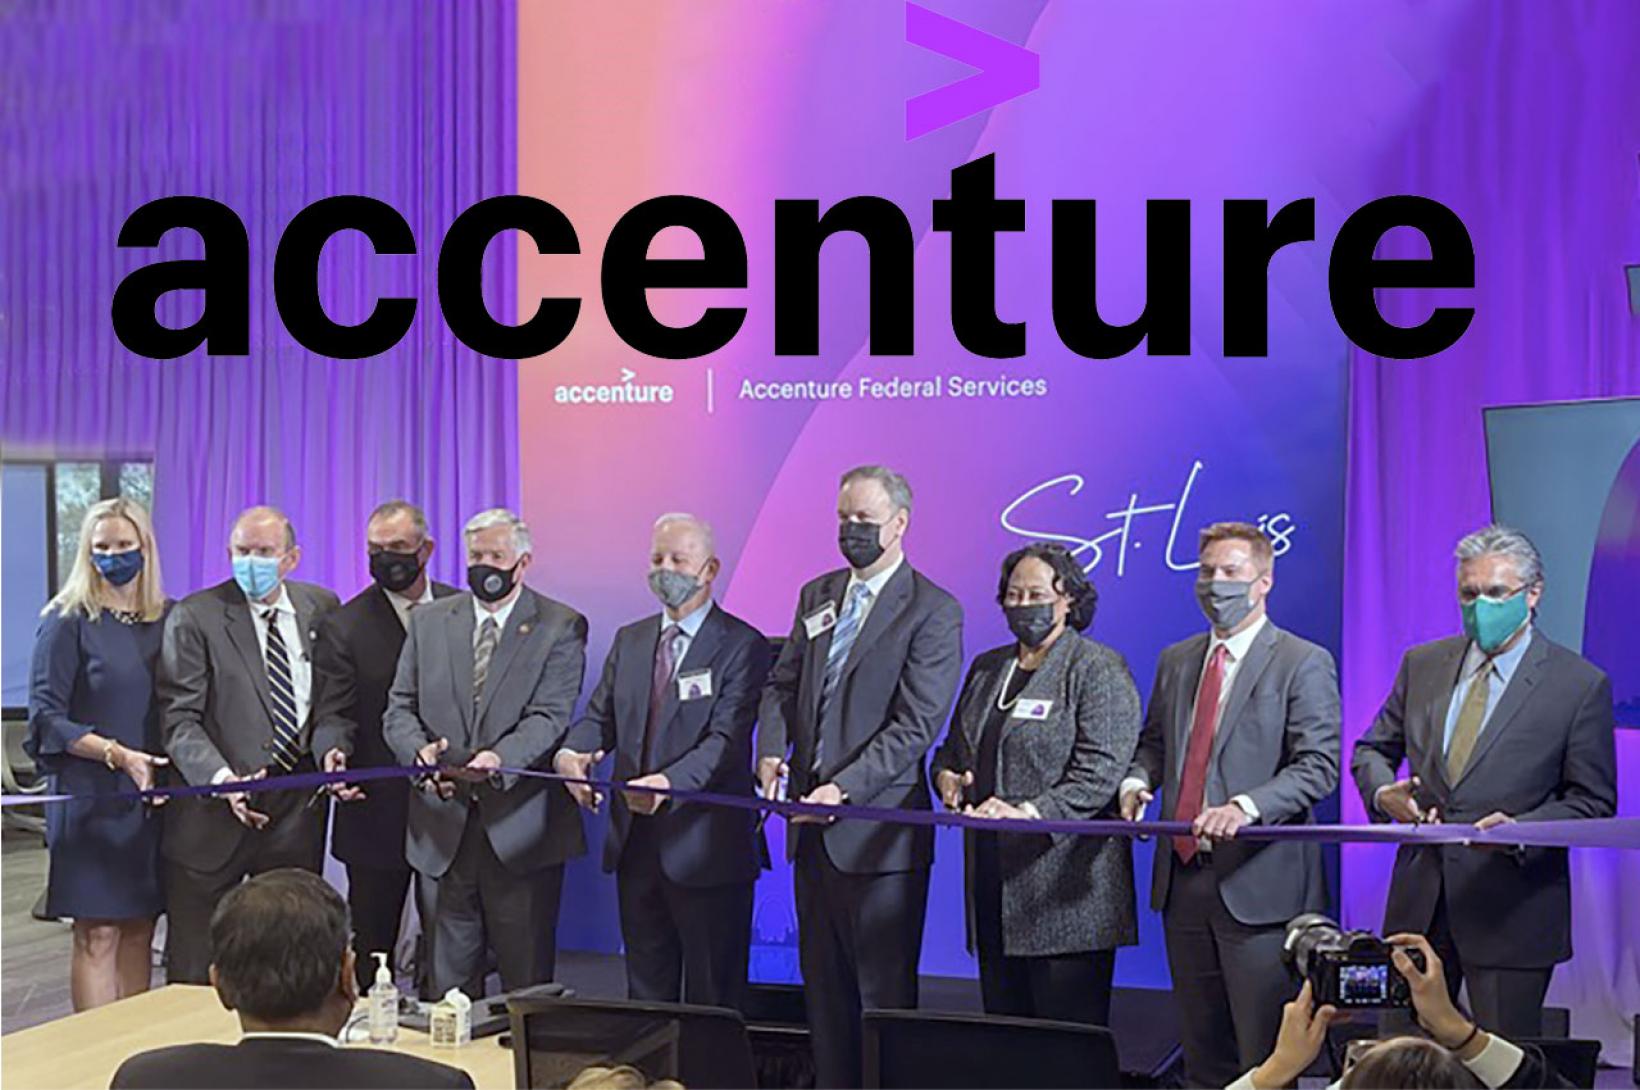 A group of business people cut a ribbon on stage with the accenture logo displayed behind them